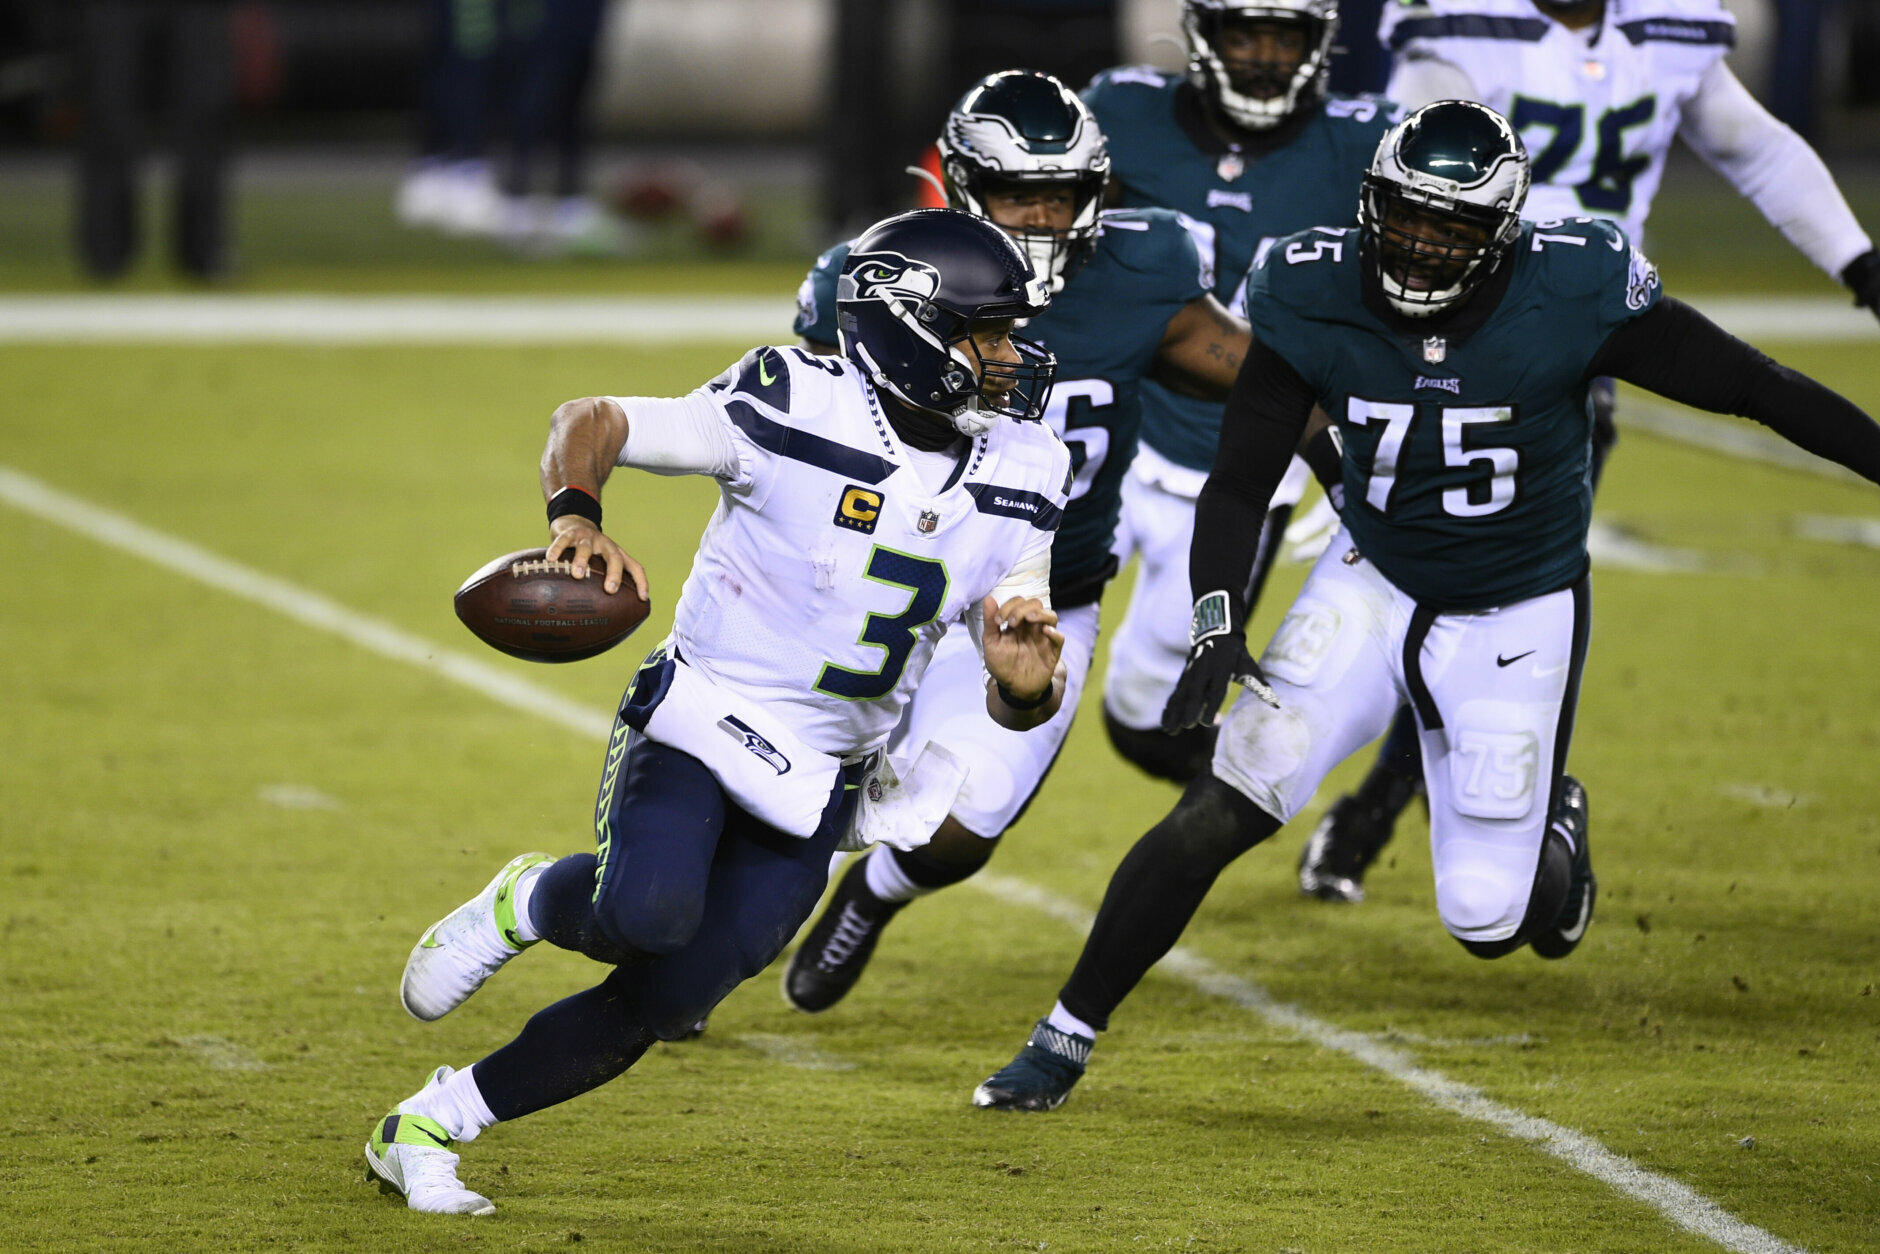 <p><em><strong>Seahawks 23</strong></em><br />
<em><strong>Eagles 17</strong></em></p>
<p>Even if the score was closer than expected, the result comes as no surprise. Russell Wilson is the greatest primetime QB of all-time (he&#8217;s now 29-8-1 under the lights) and Carson Wentz took six sacks behind Philadelphia&#8217;s 10th different offensive line combination, adding to his league-leading turnover ledger. The Eagles have undoubtedly had some bad breaks but heads should roll if they fail to win the worst division in the league.</p>
